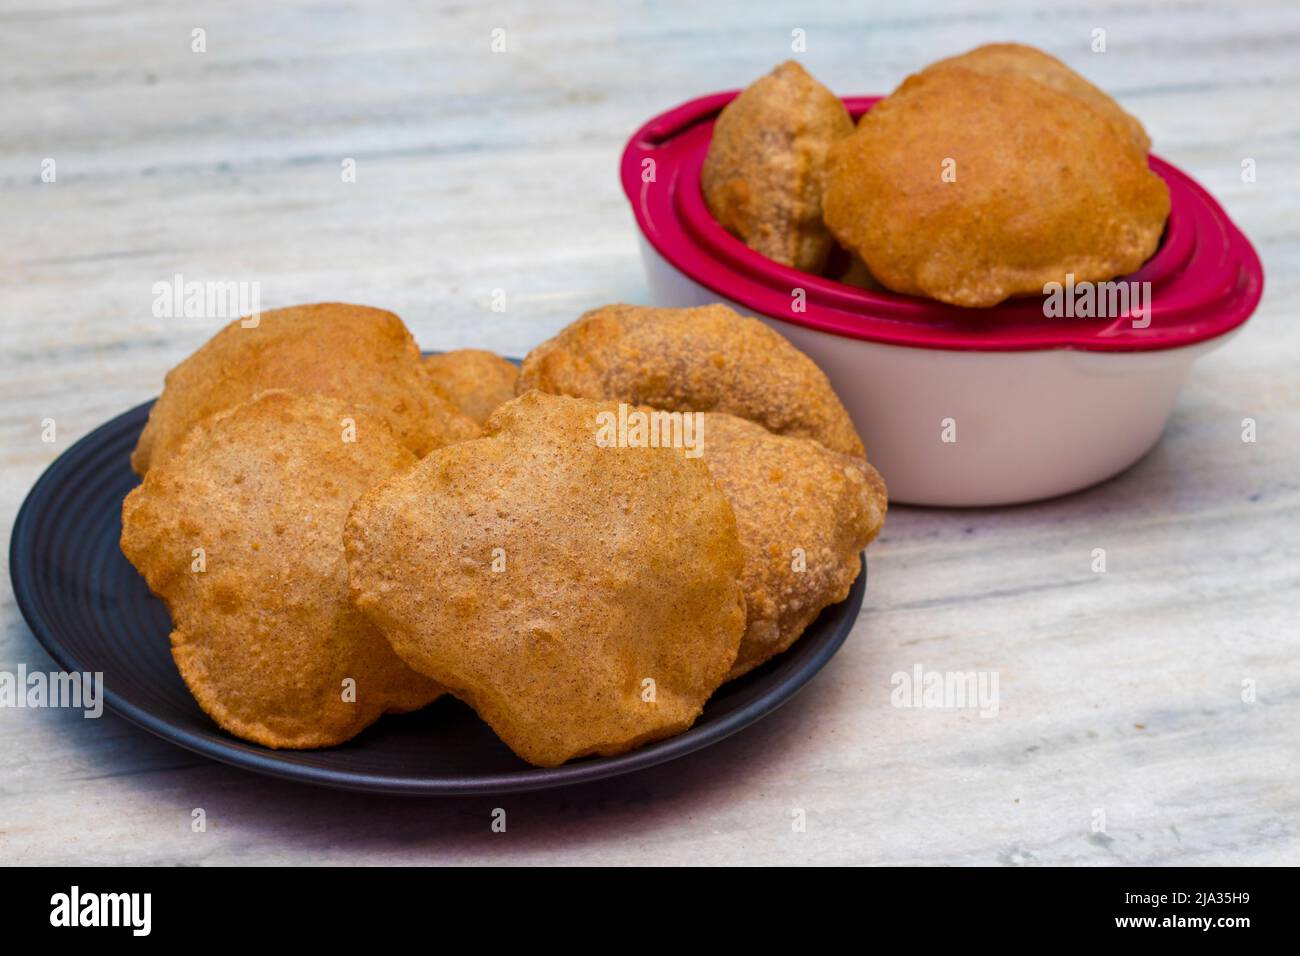 popular food in south Asian countries like India,Pakistan,Bangladesh 'puri' made of millet flour. Stock Photo